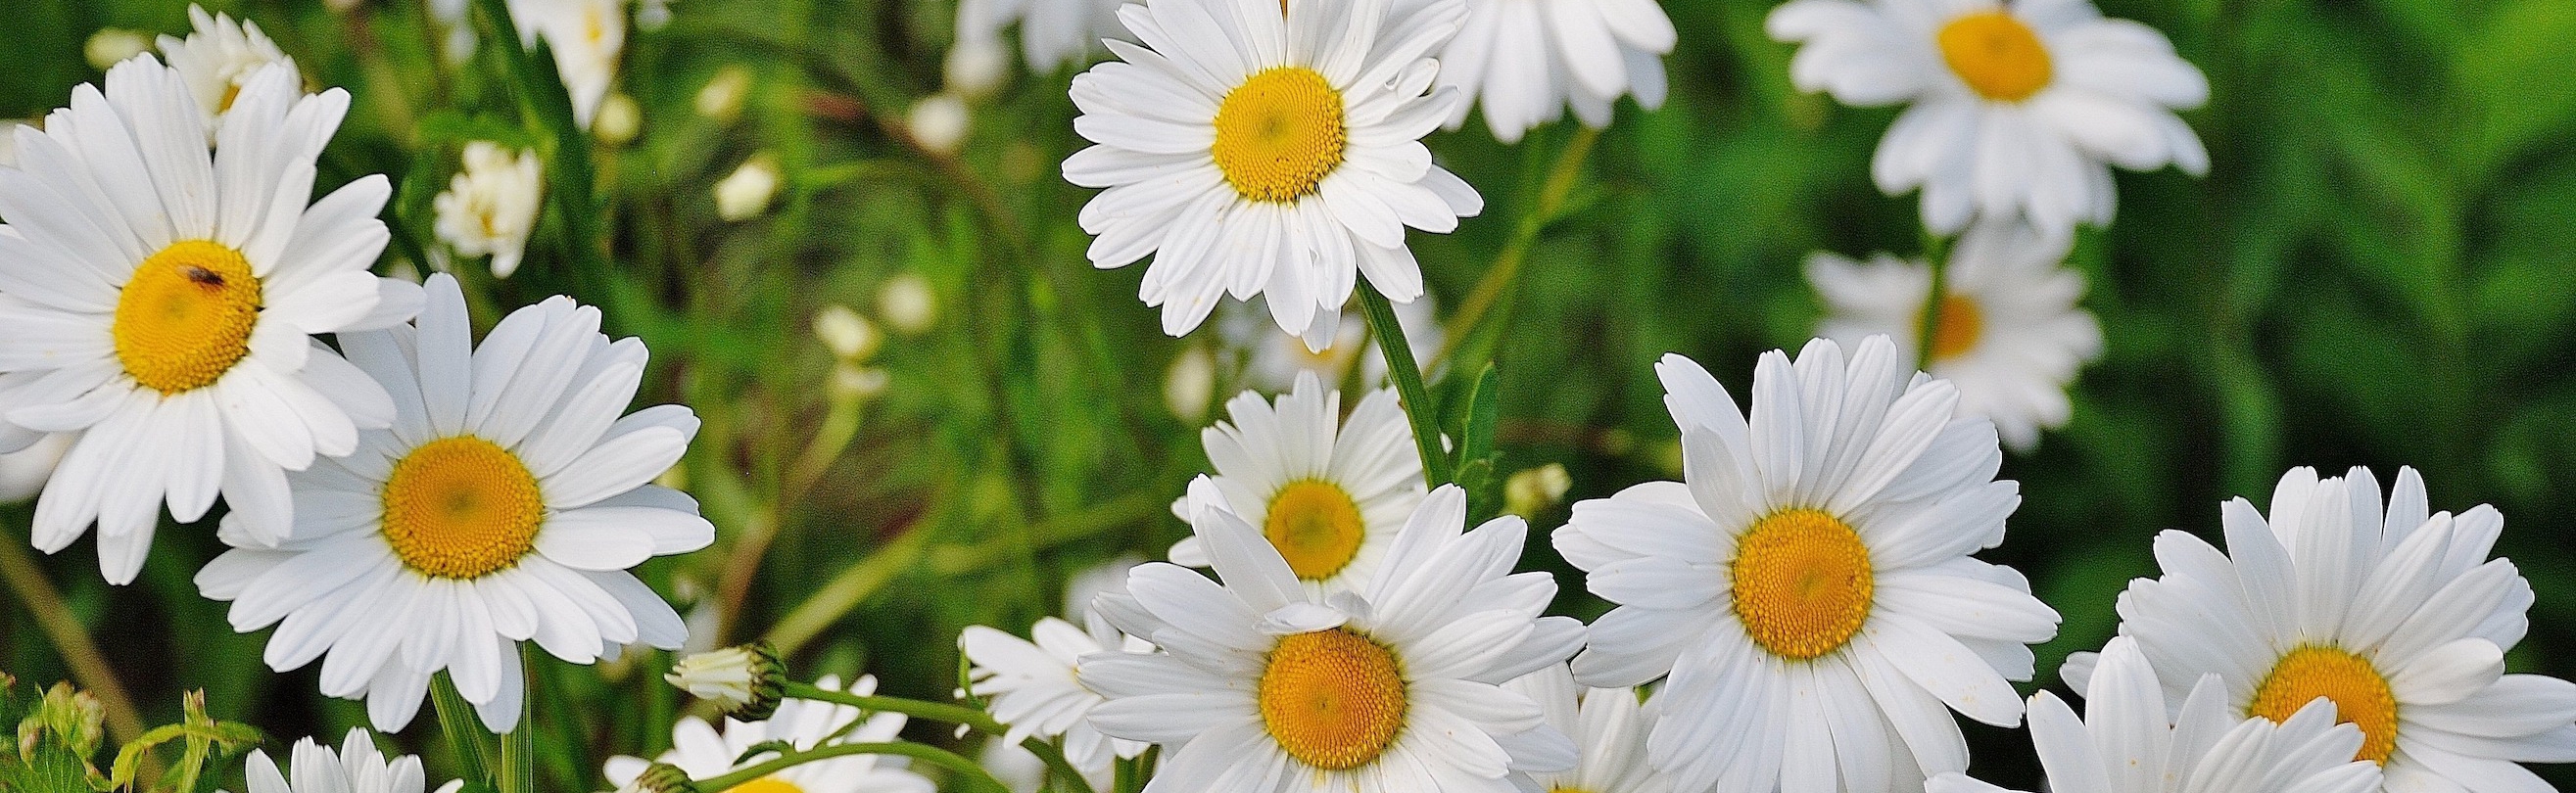 Daisies in field